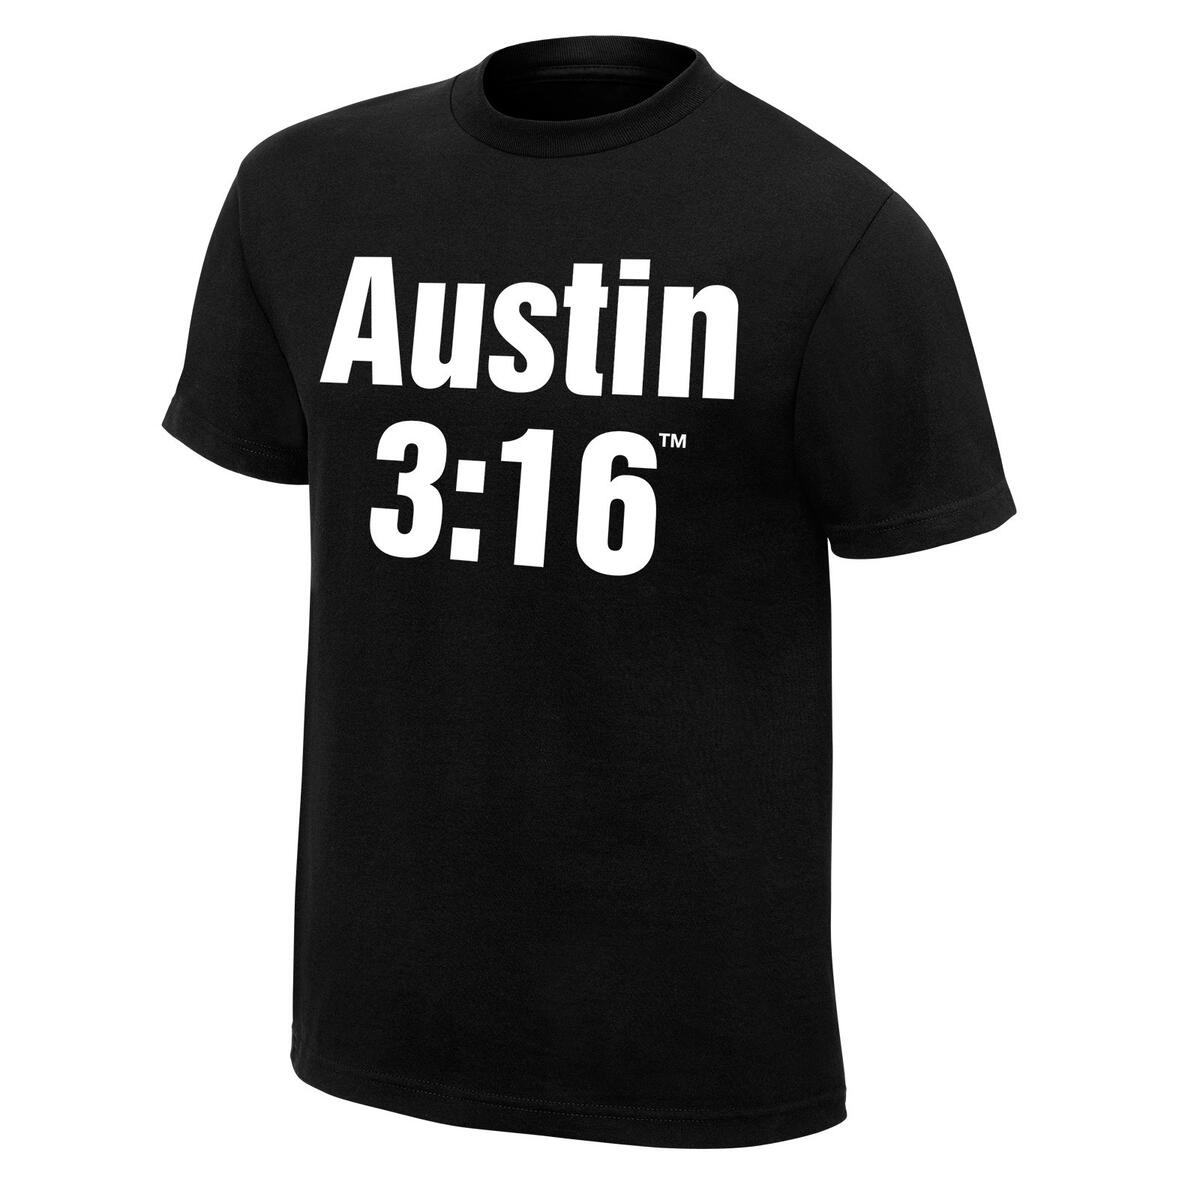 Austin 3:16 gear throughout the years: photos | WWE